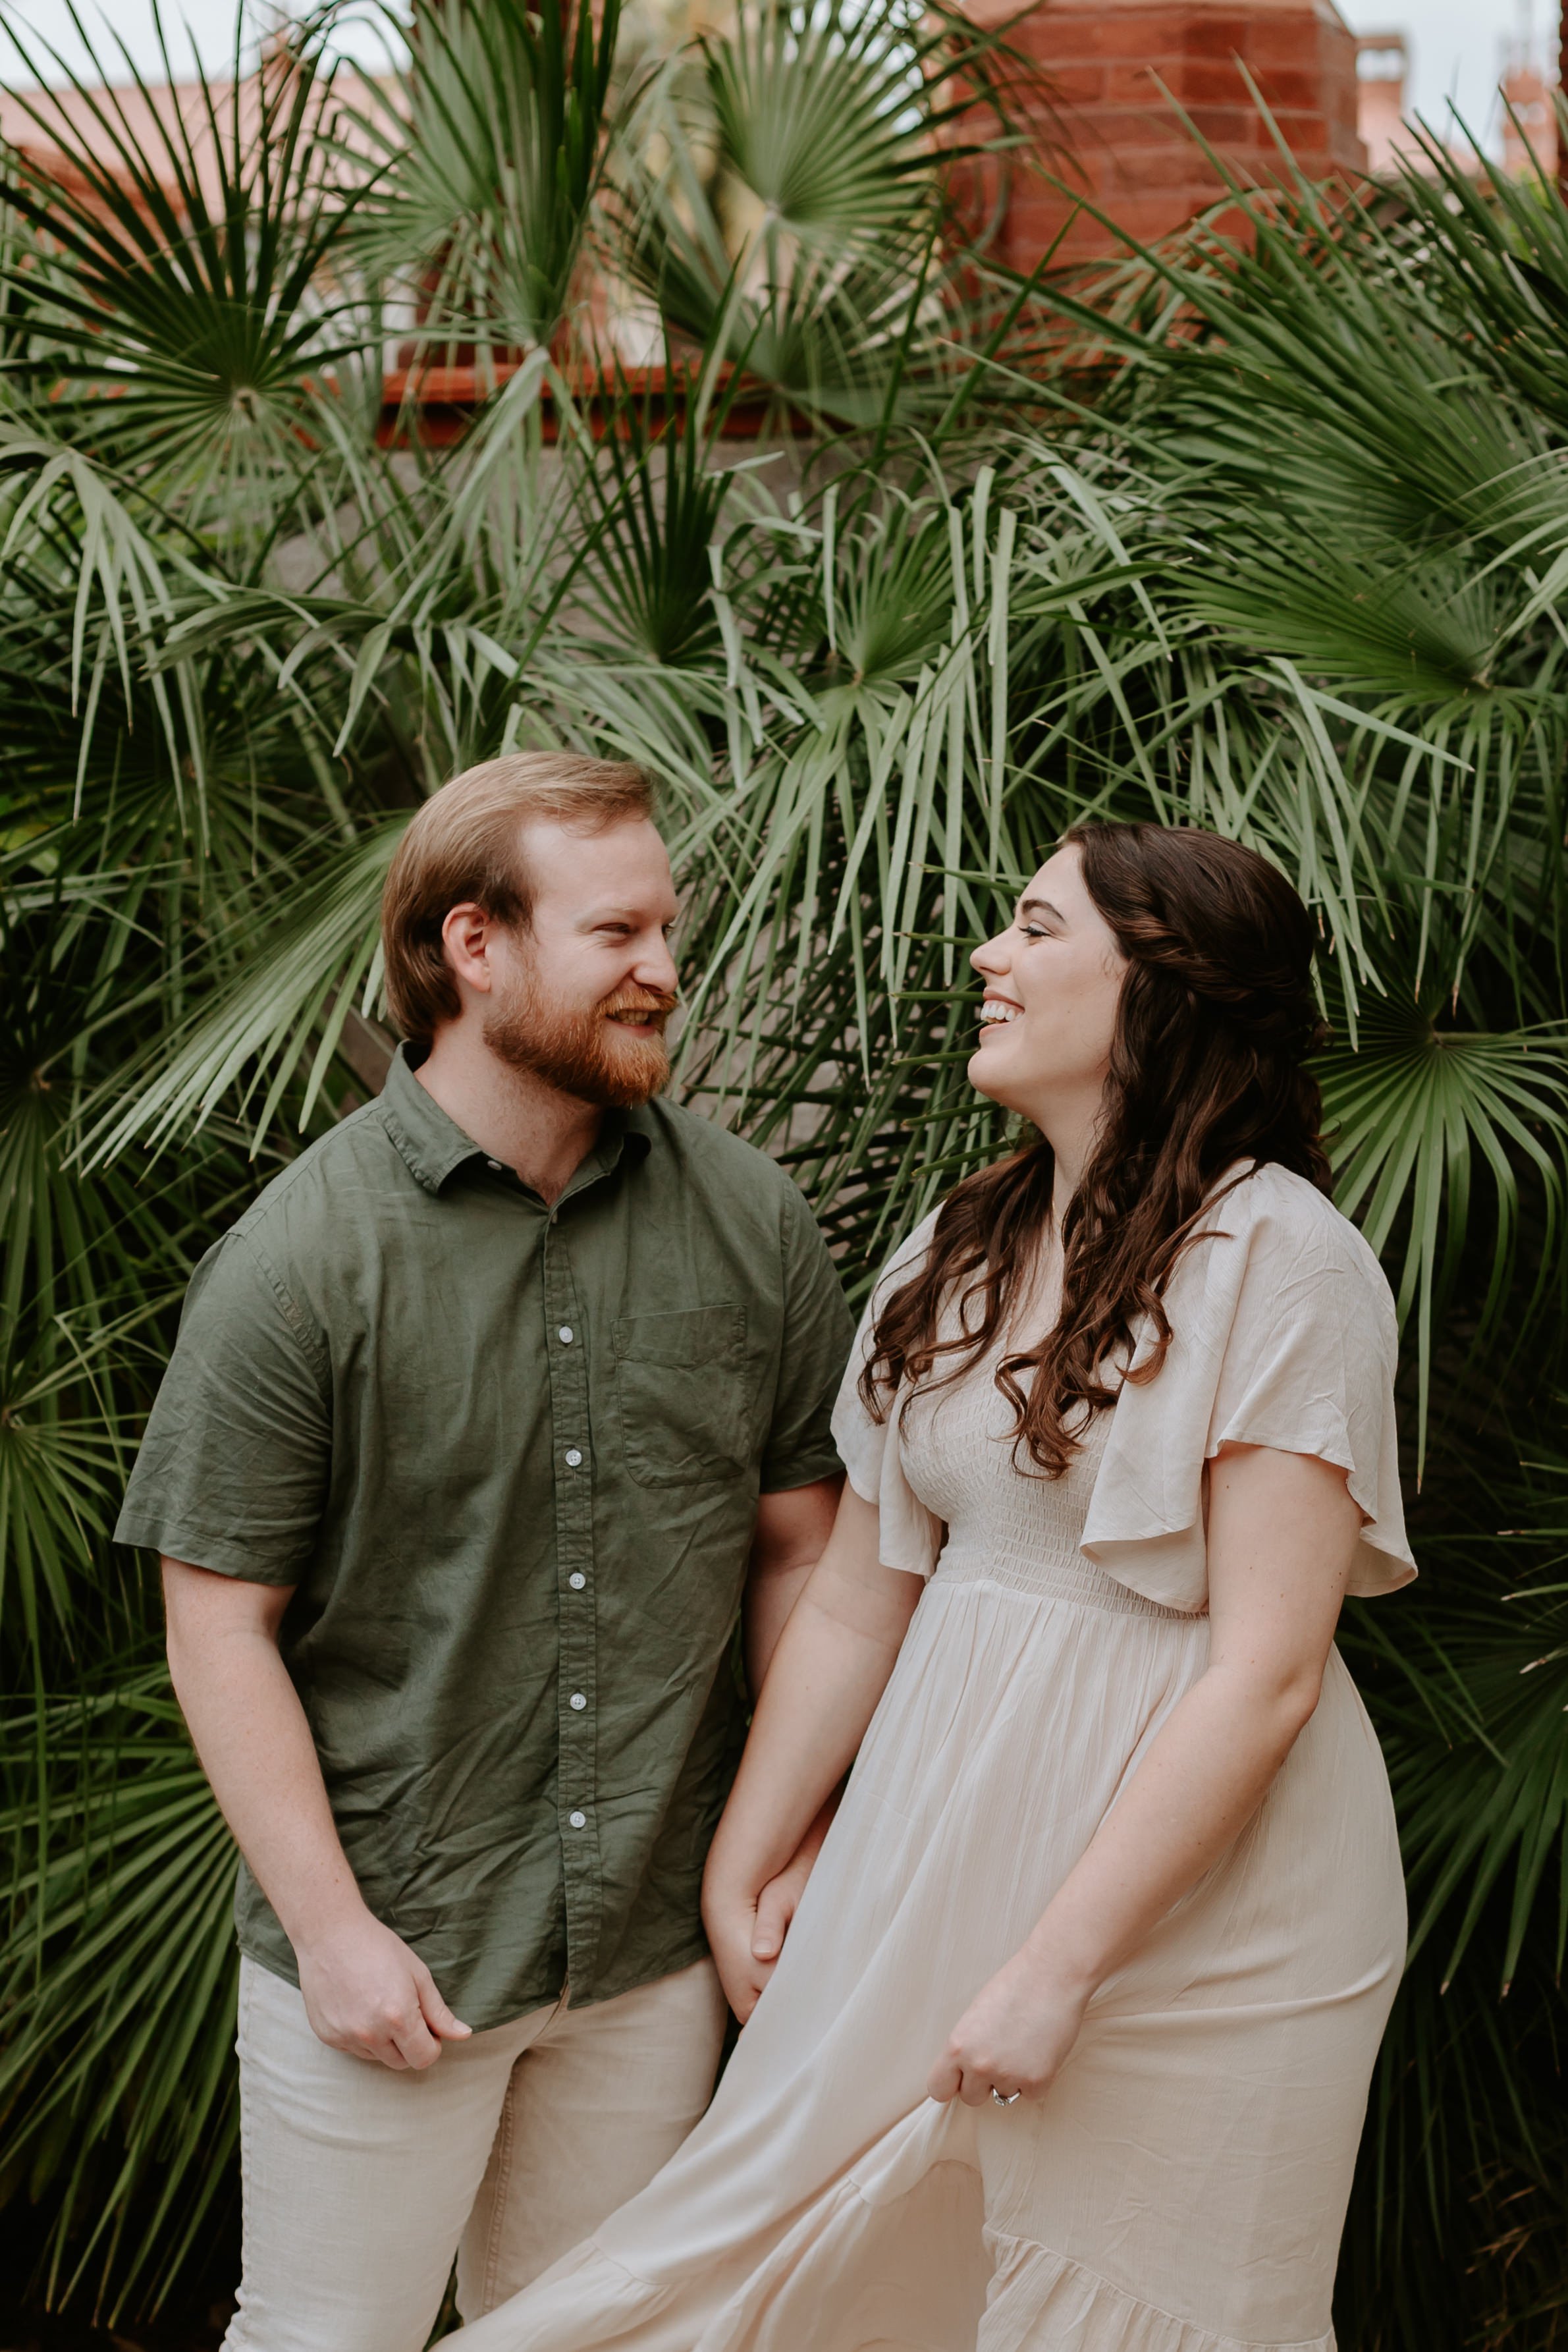 Man and woman smile at each other in front of palm fronds.